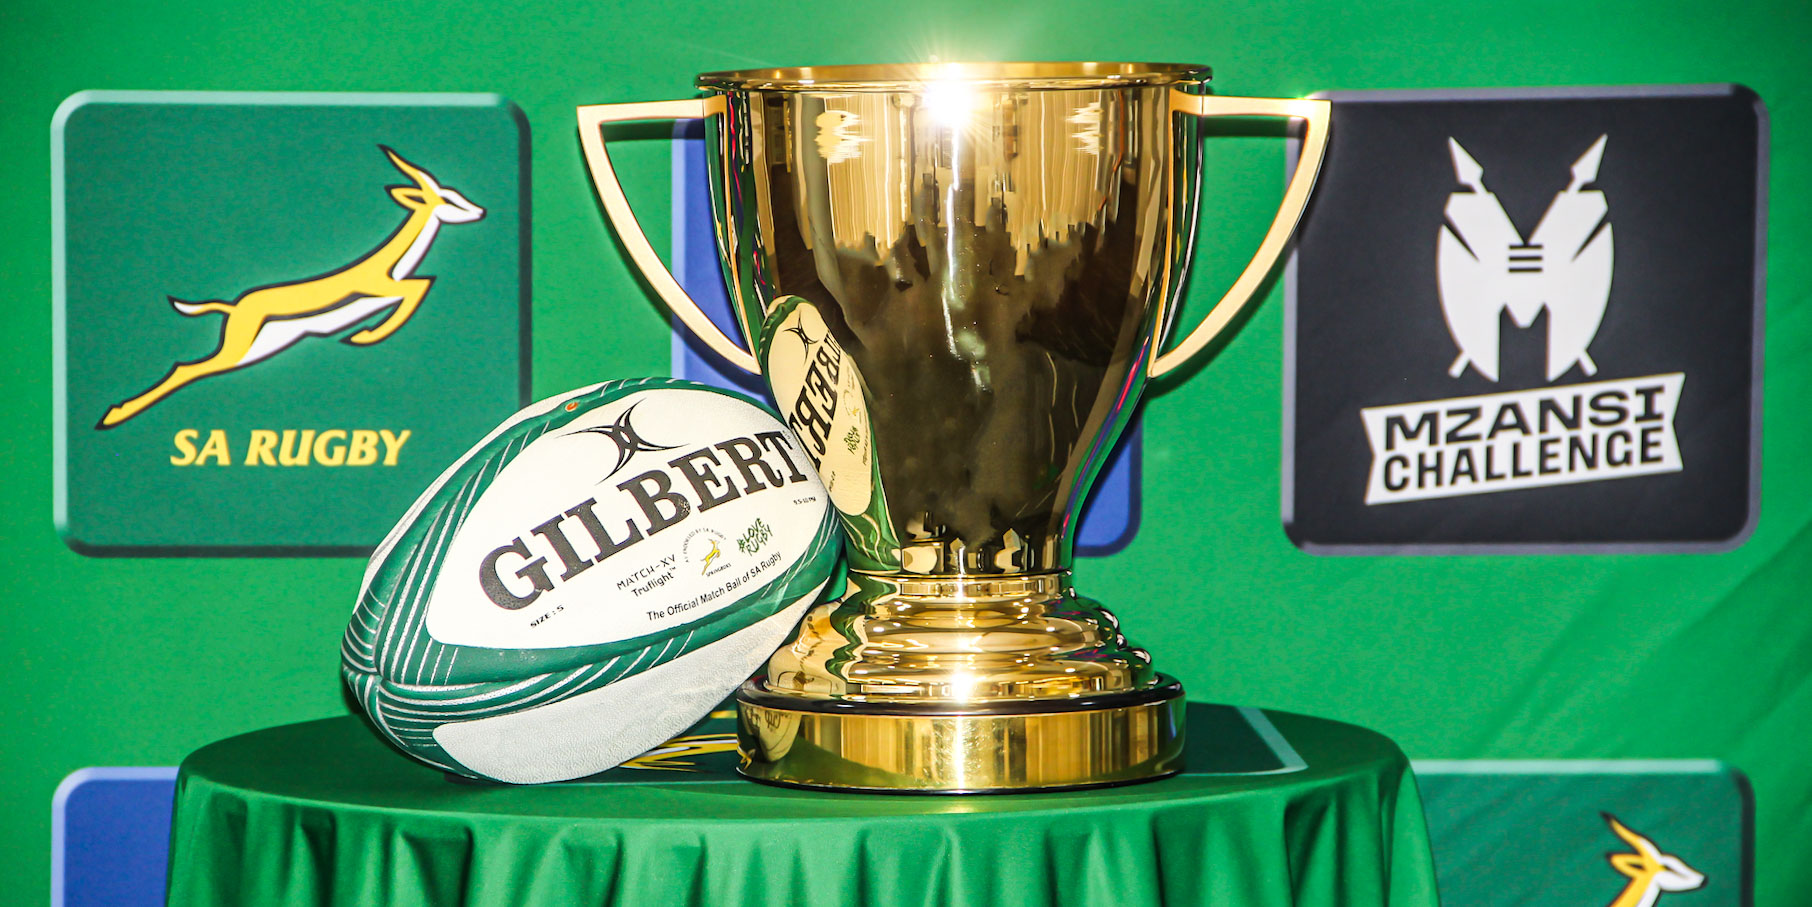 The Mzansi Challenge trophy will be up for grabs from this weekend onwards.